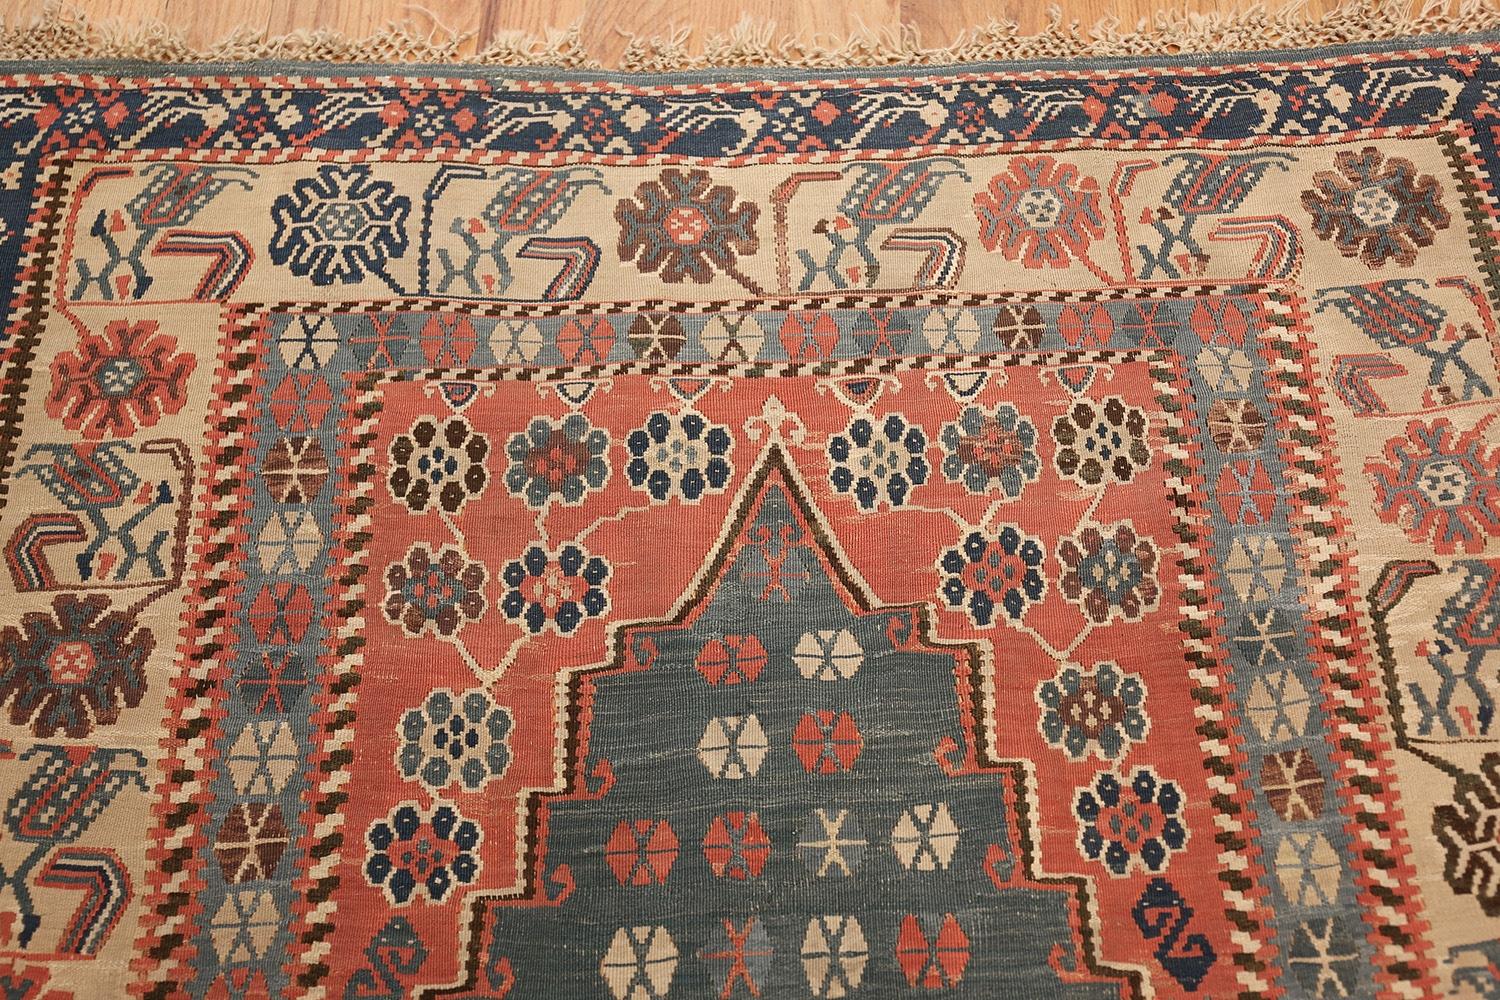 Hand-Woven Antique Turkish Prayer Design Kilim Rug. Size: 4 ft 3 in x 5 ft 4 in